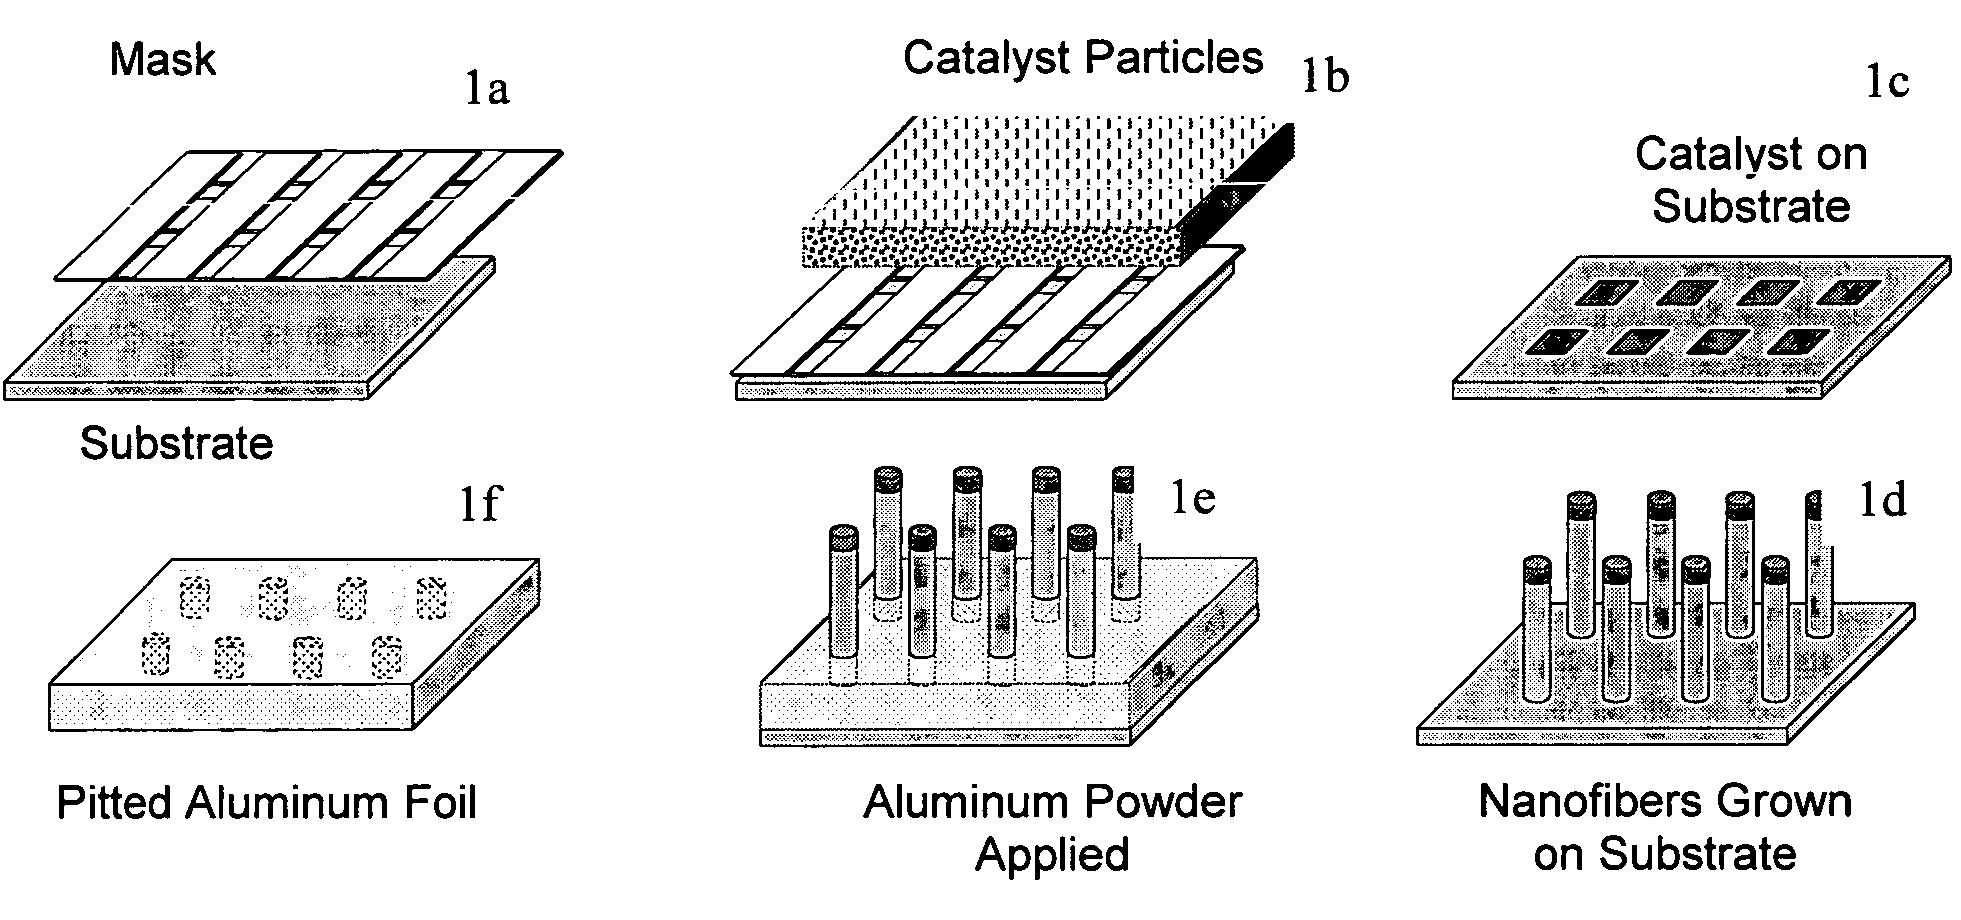 Aluminum electrolytic capacitor having an anode having a uniform array of micron-sized pores